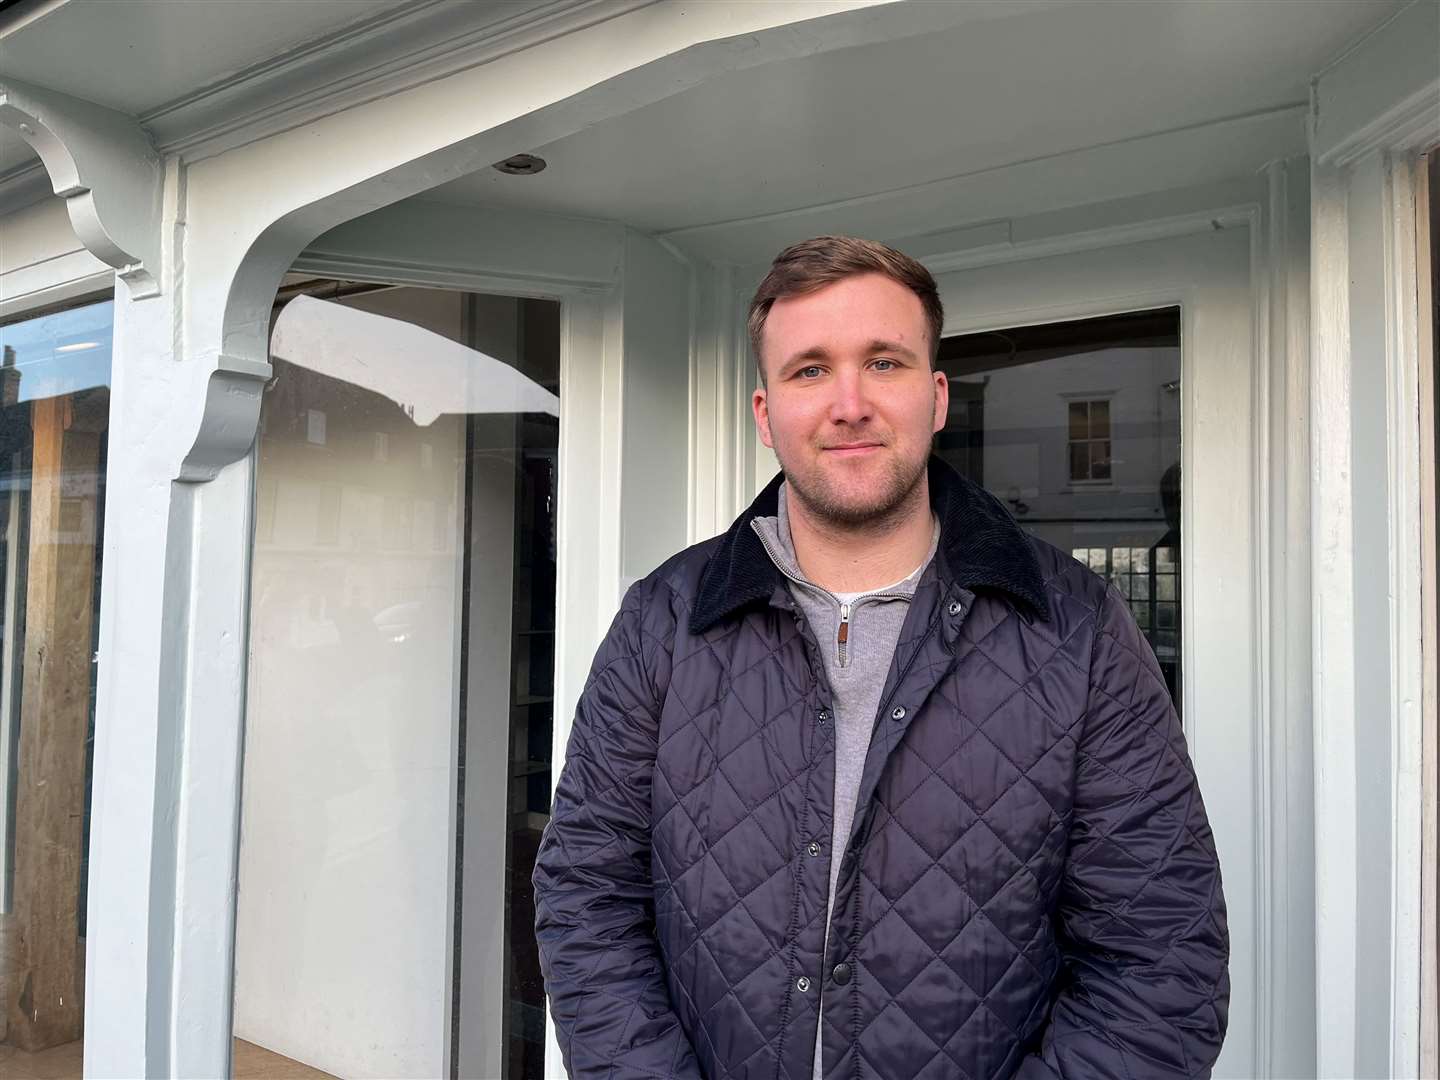 Jacob Compton is the director of Compton's Kitchens in Faversham and is hoping to open in Tenterden